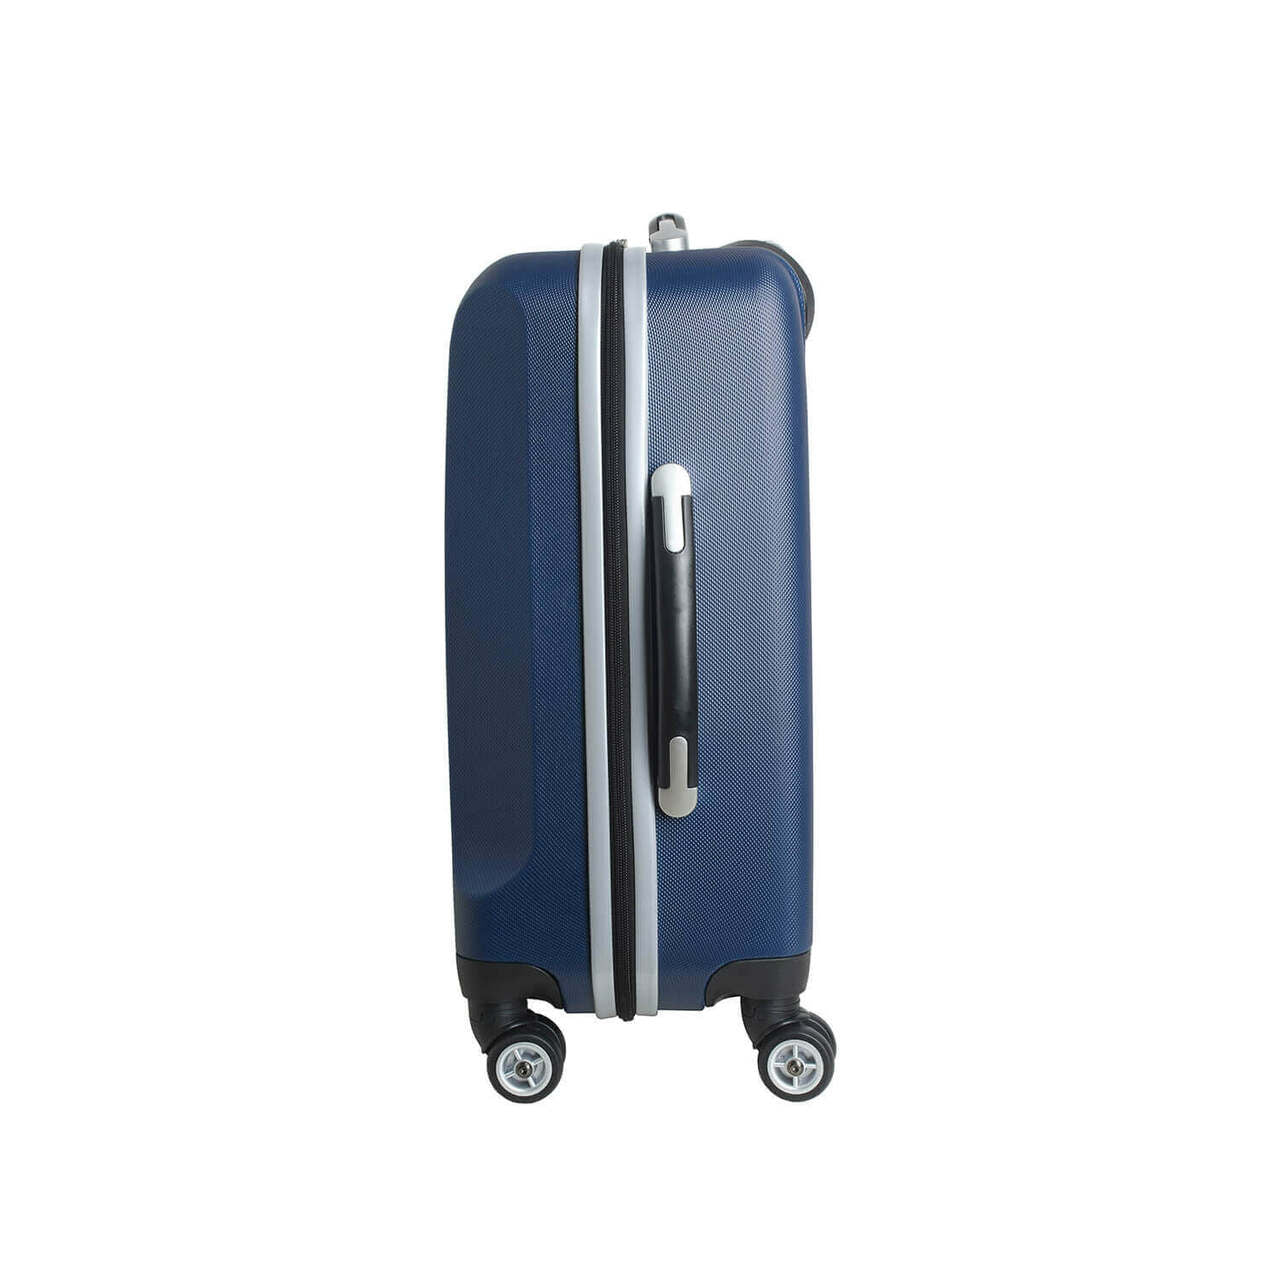 Personalized Initial Name letter "V" 20 inches Carry on Hardcase Spinner Luggage by Mojo in NAVY